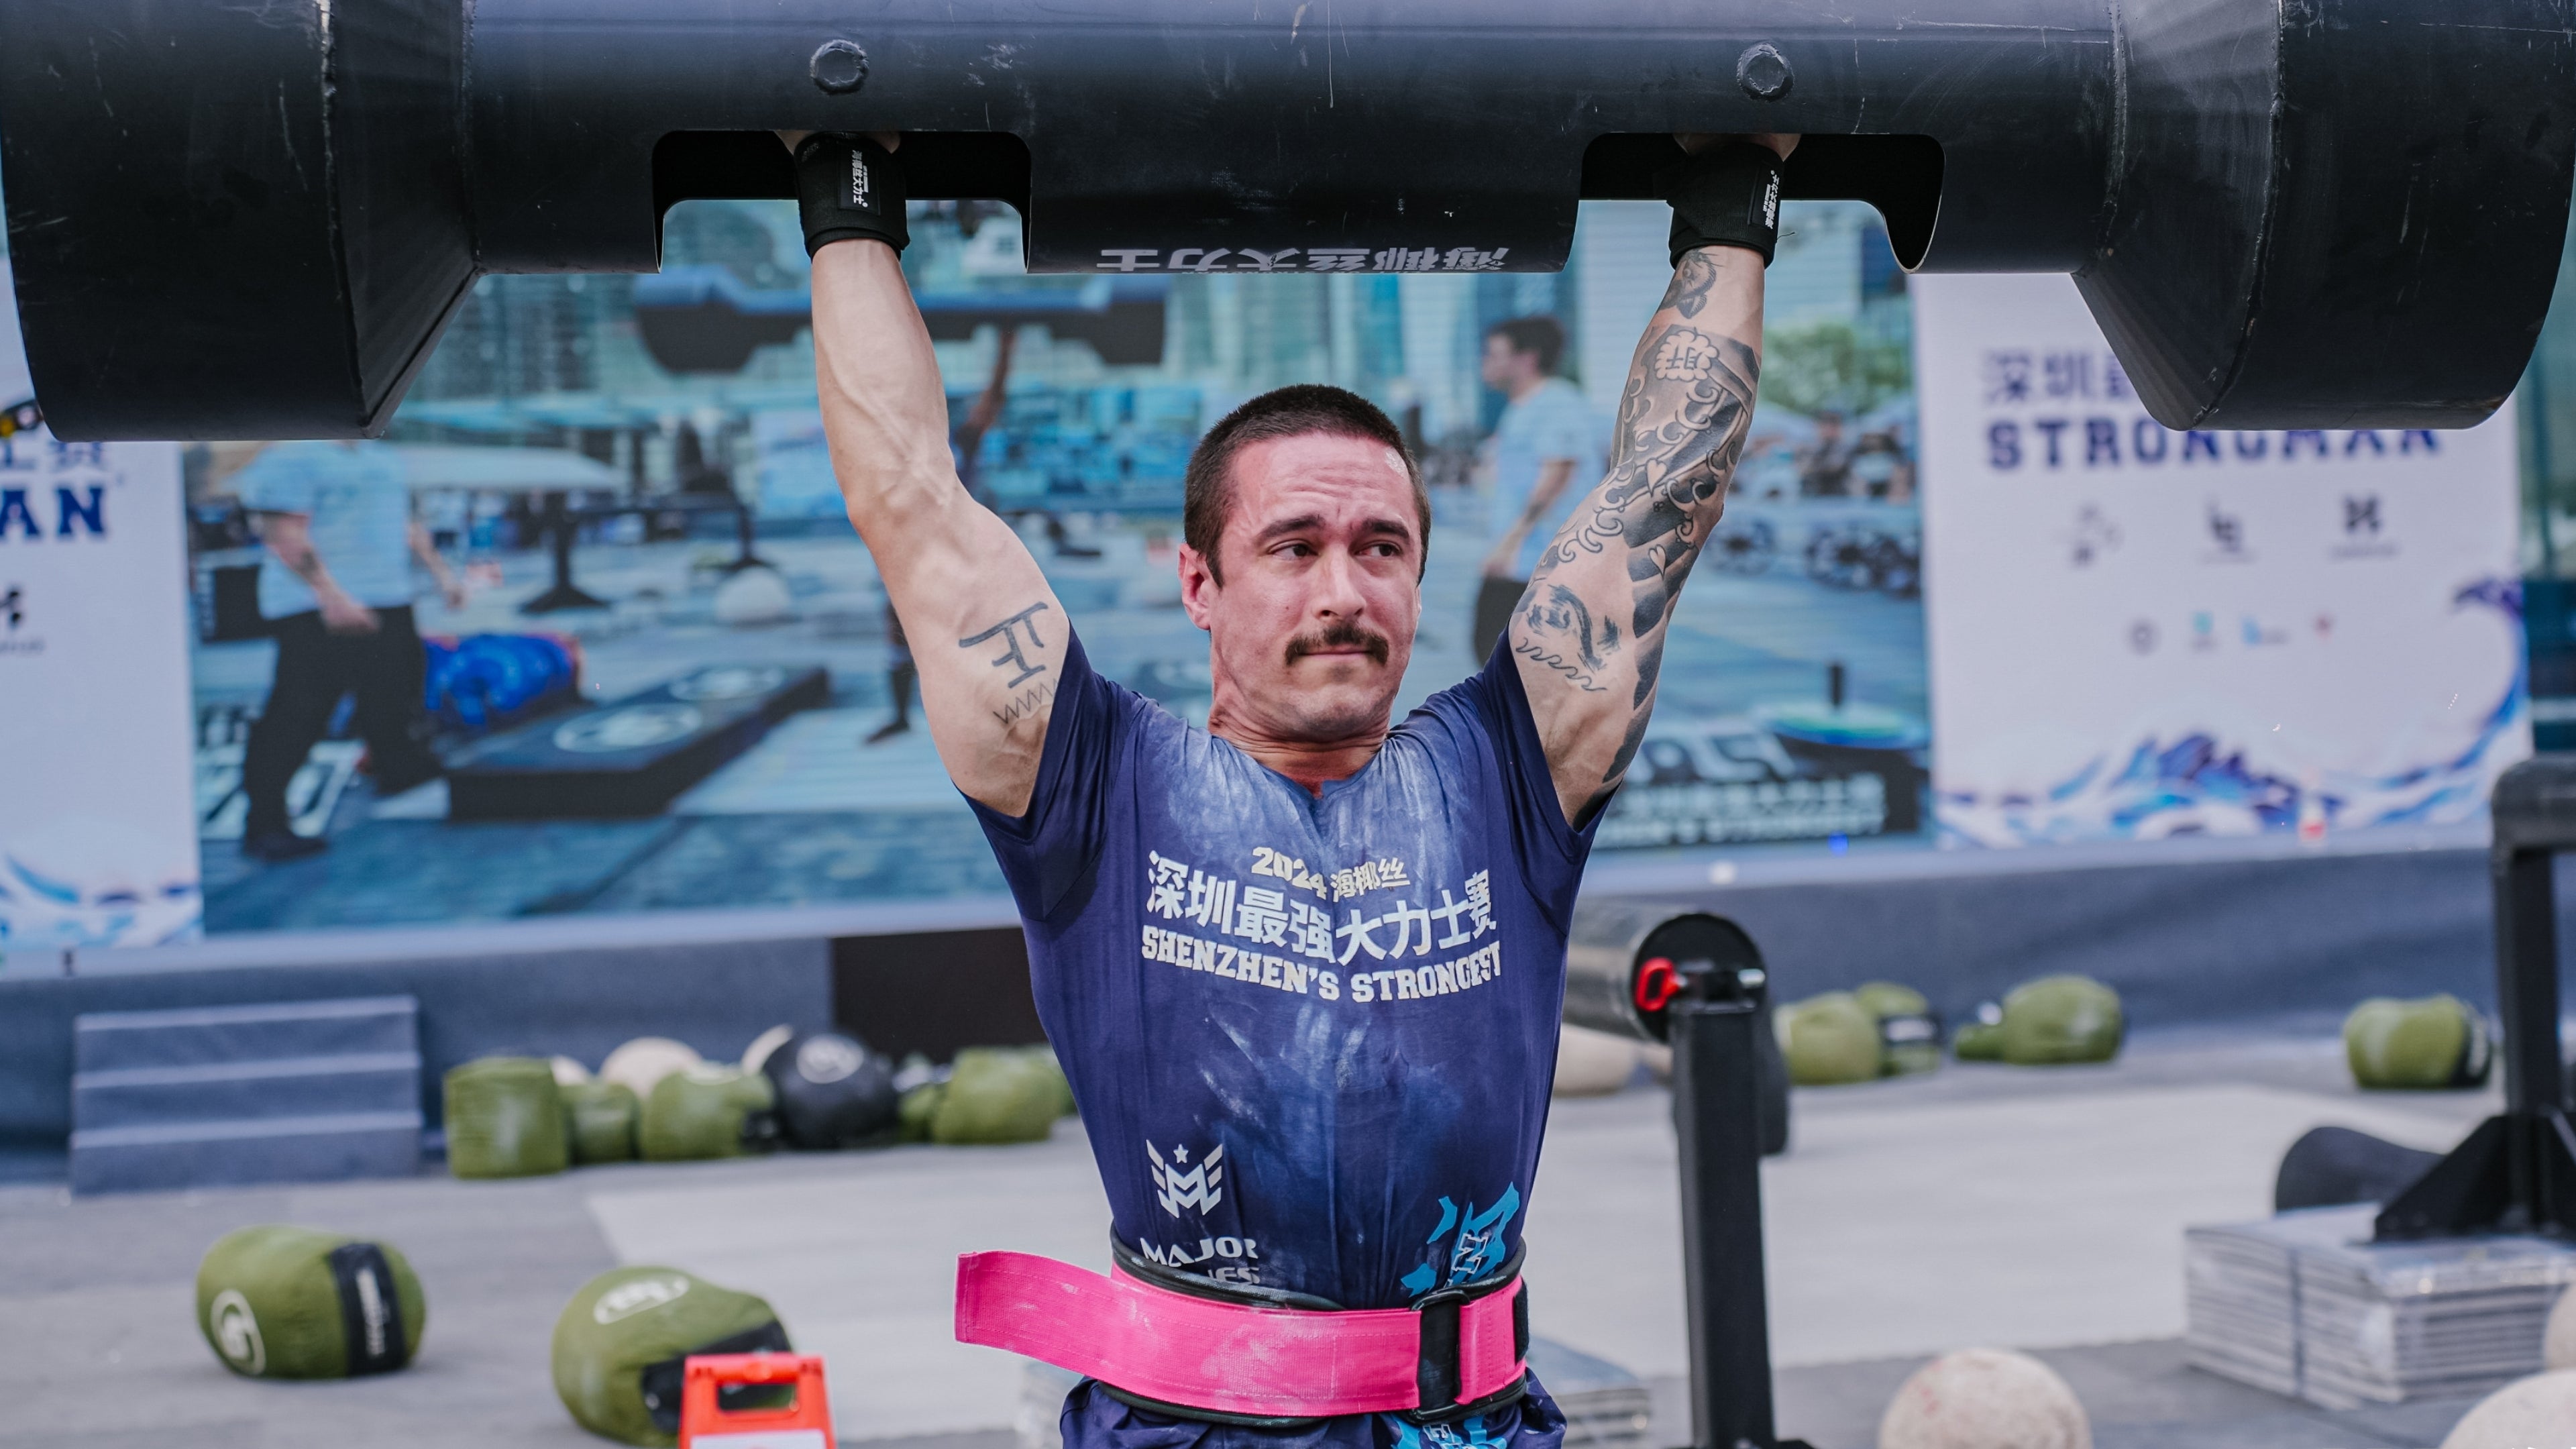 A focused male athlete lifting a heavy log overhead